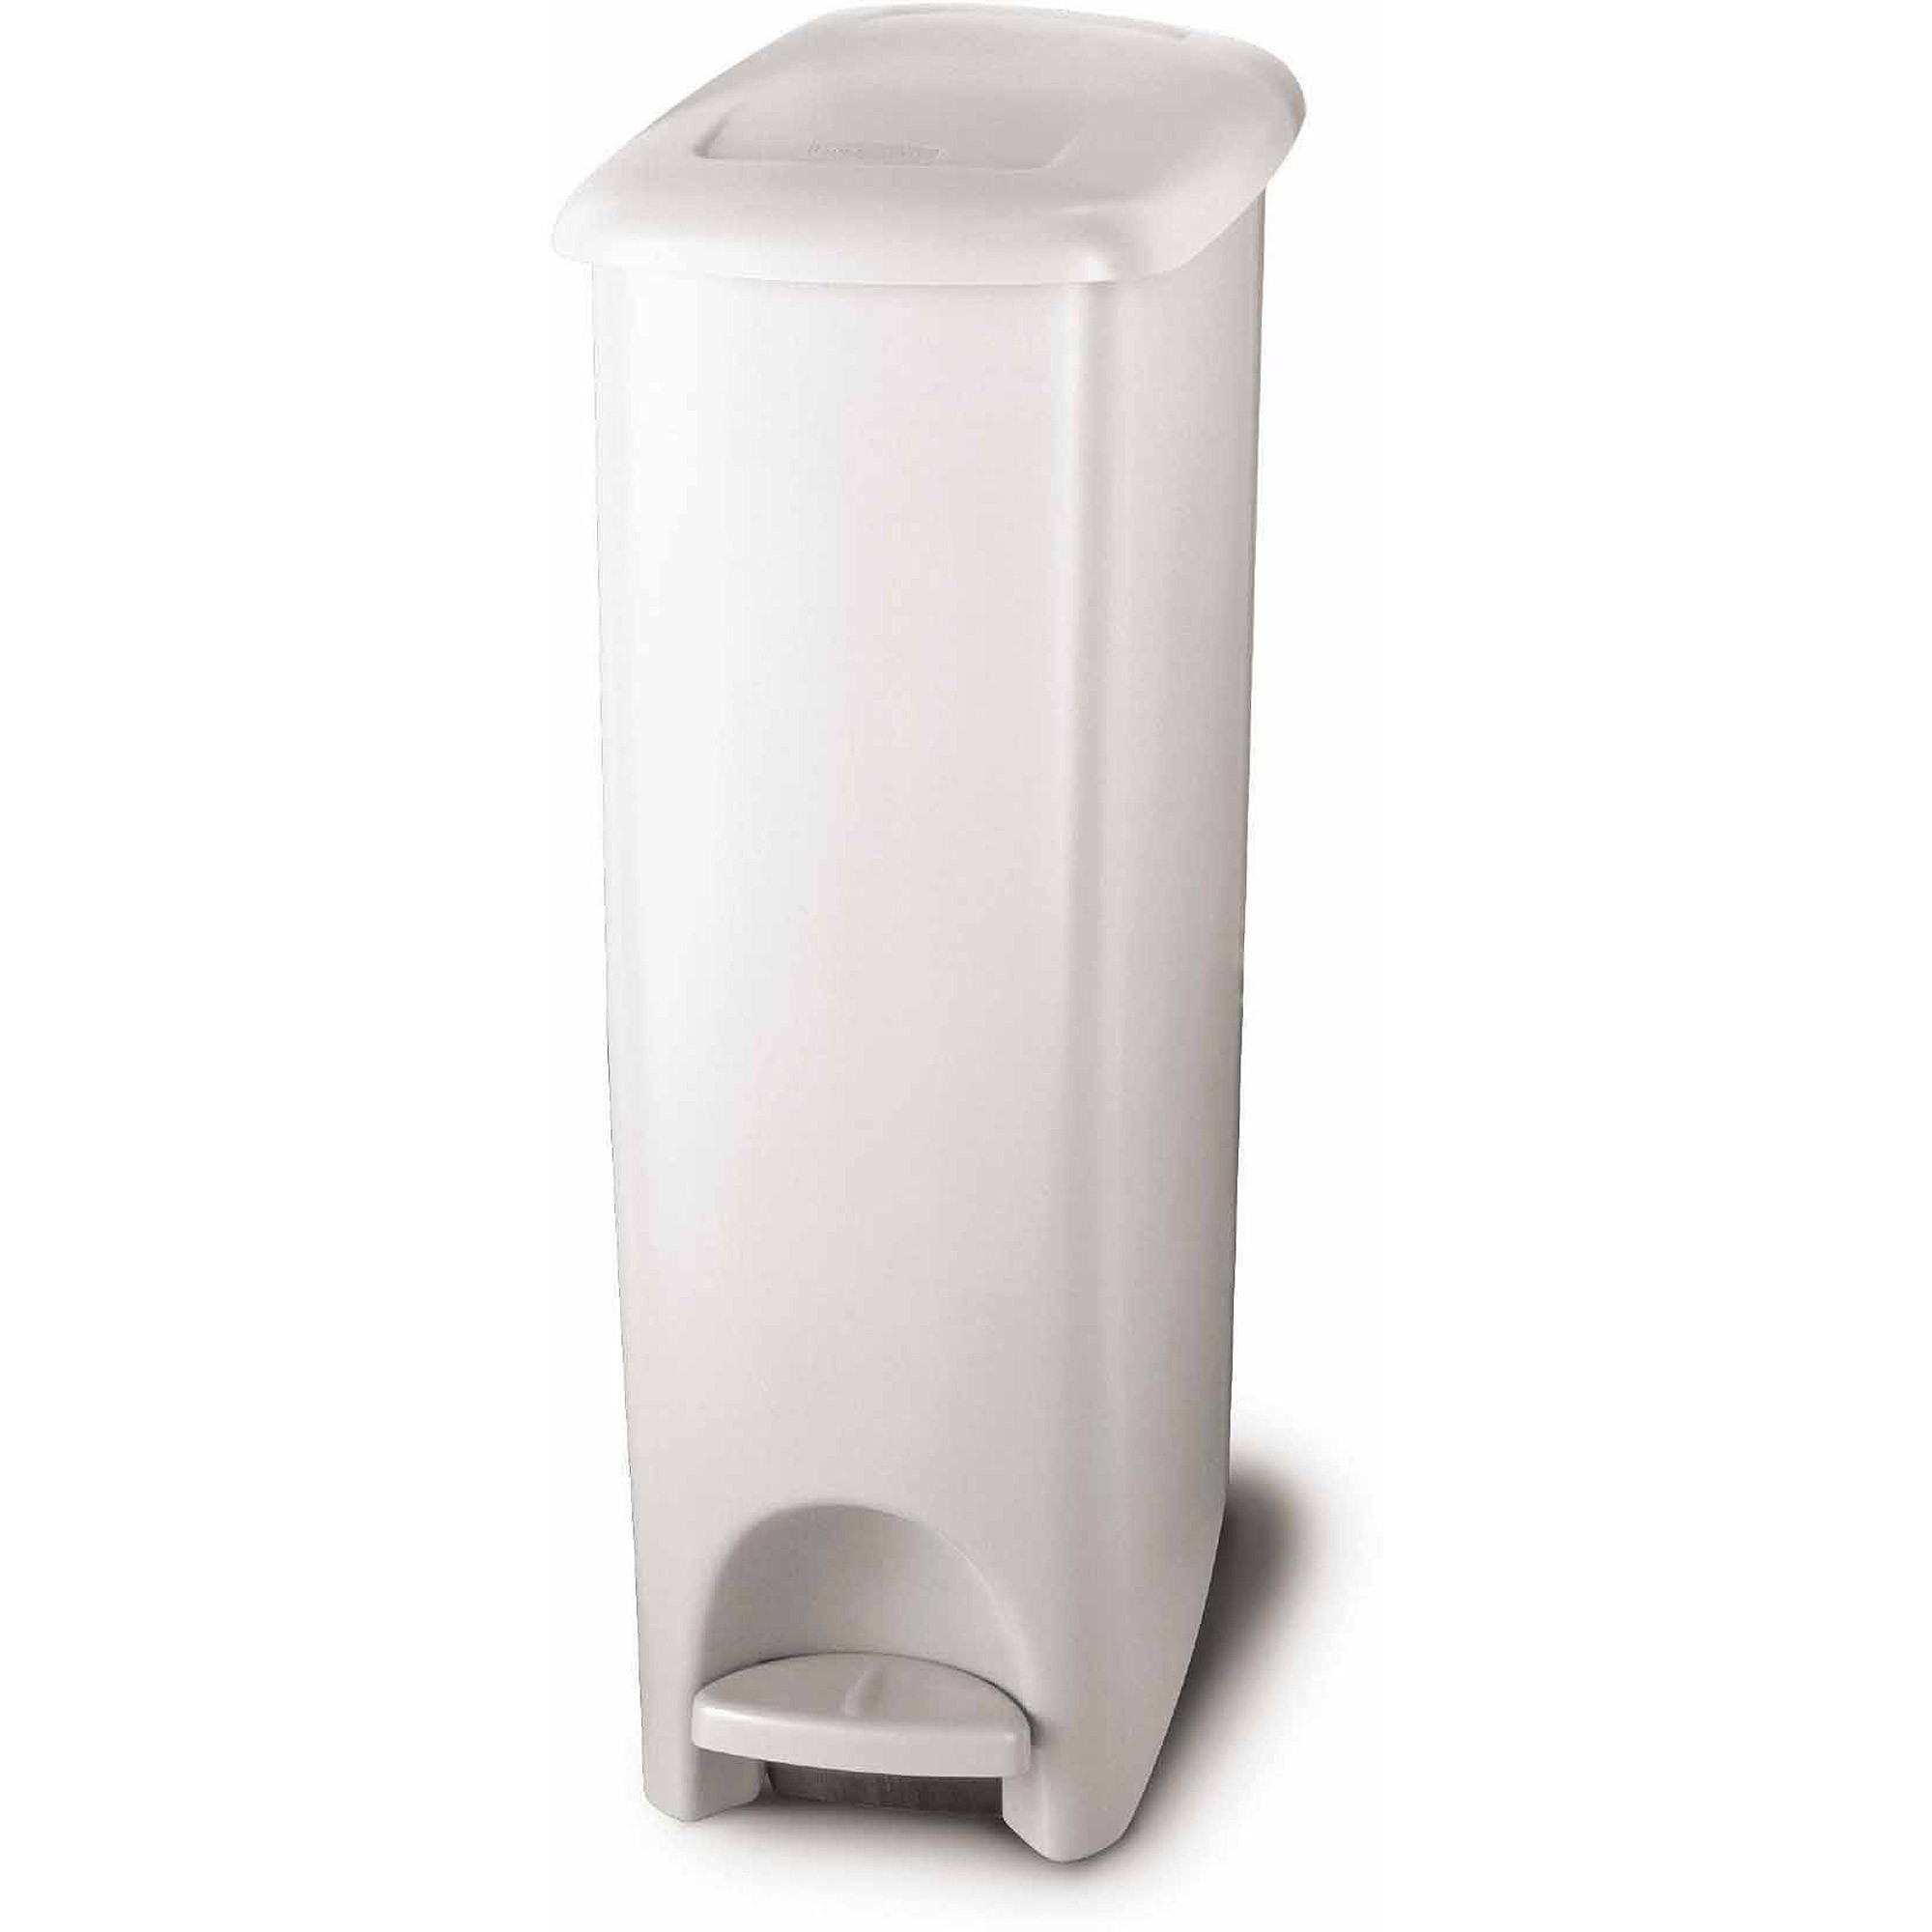 White Kitchen Trash Can
 Step Slim Fit Trash Can Easily Wipe Clean Plastic